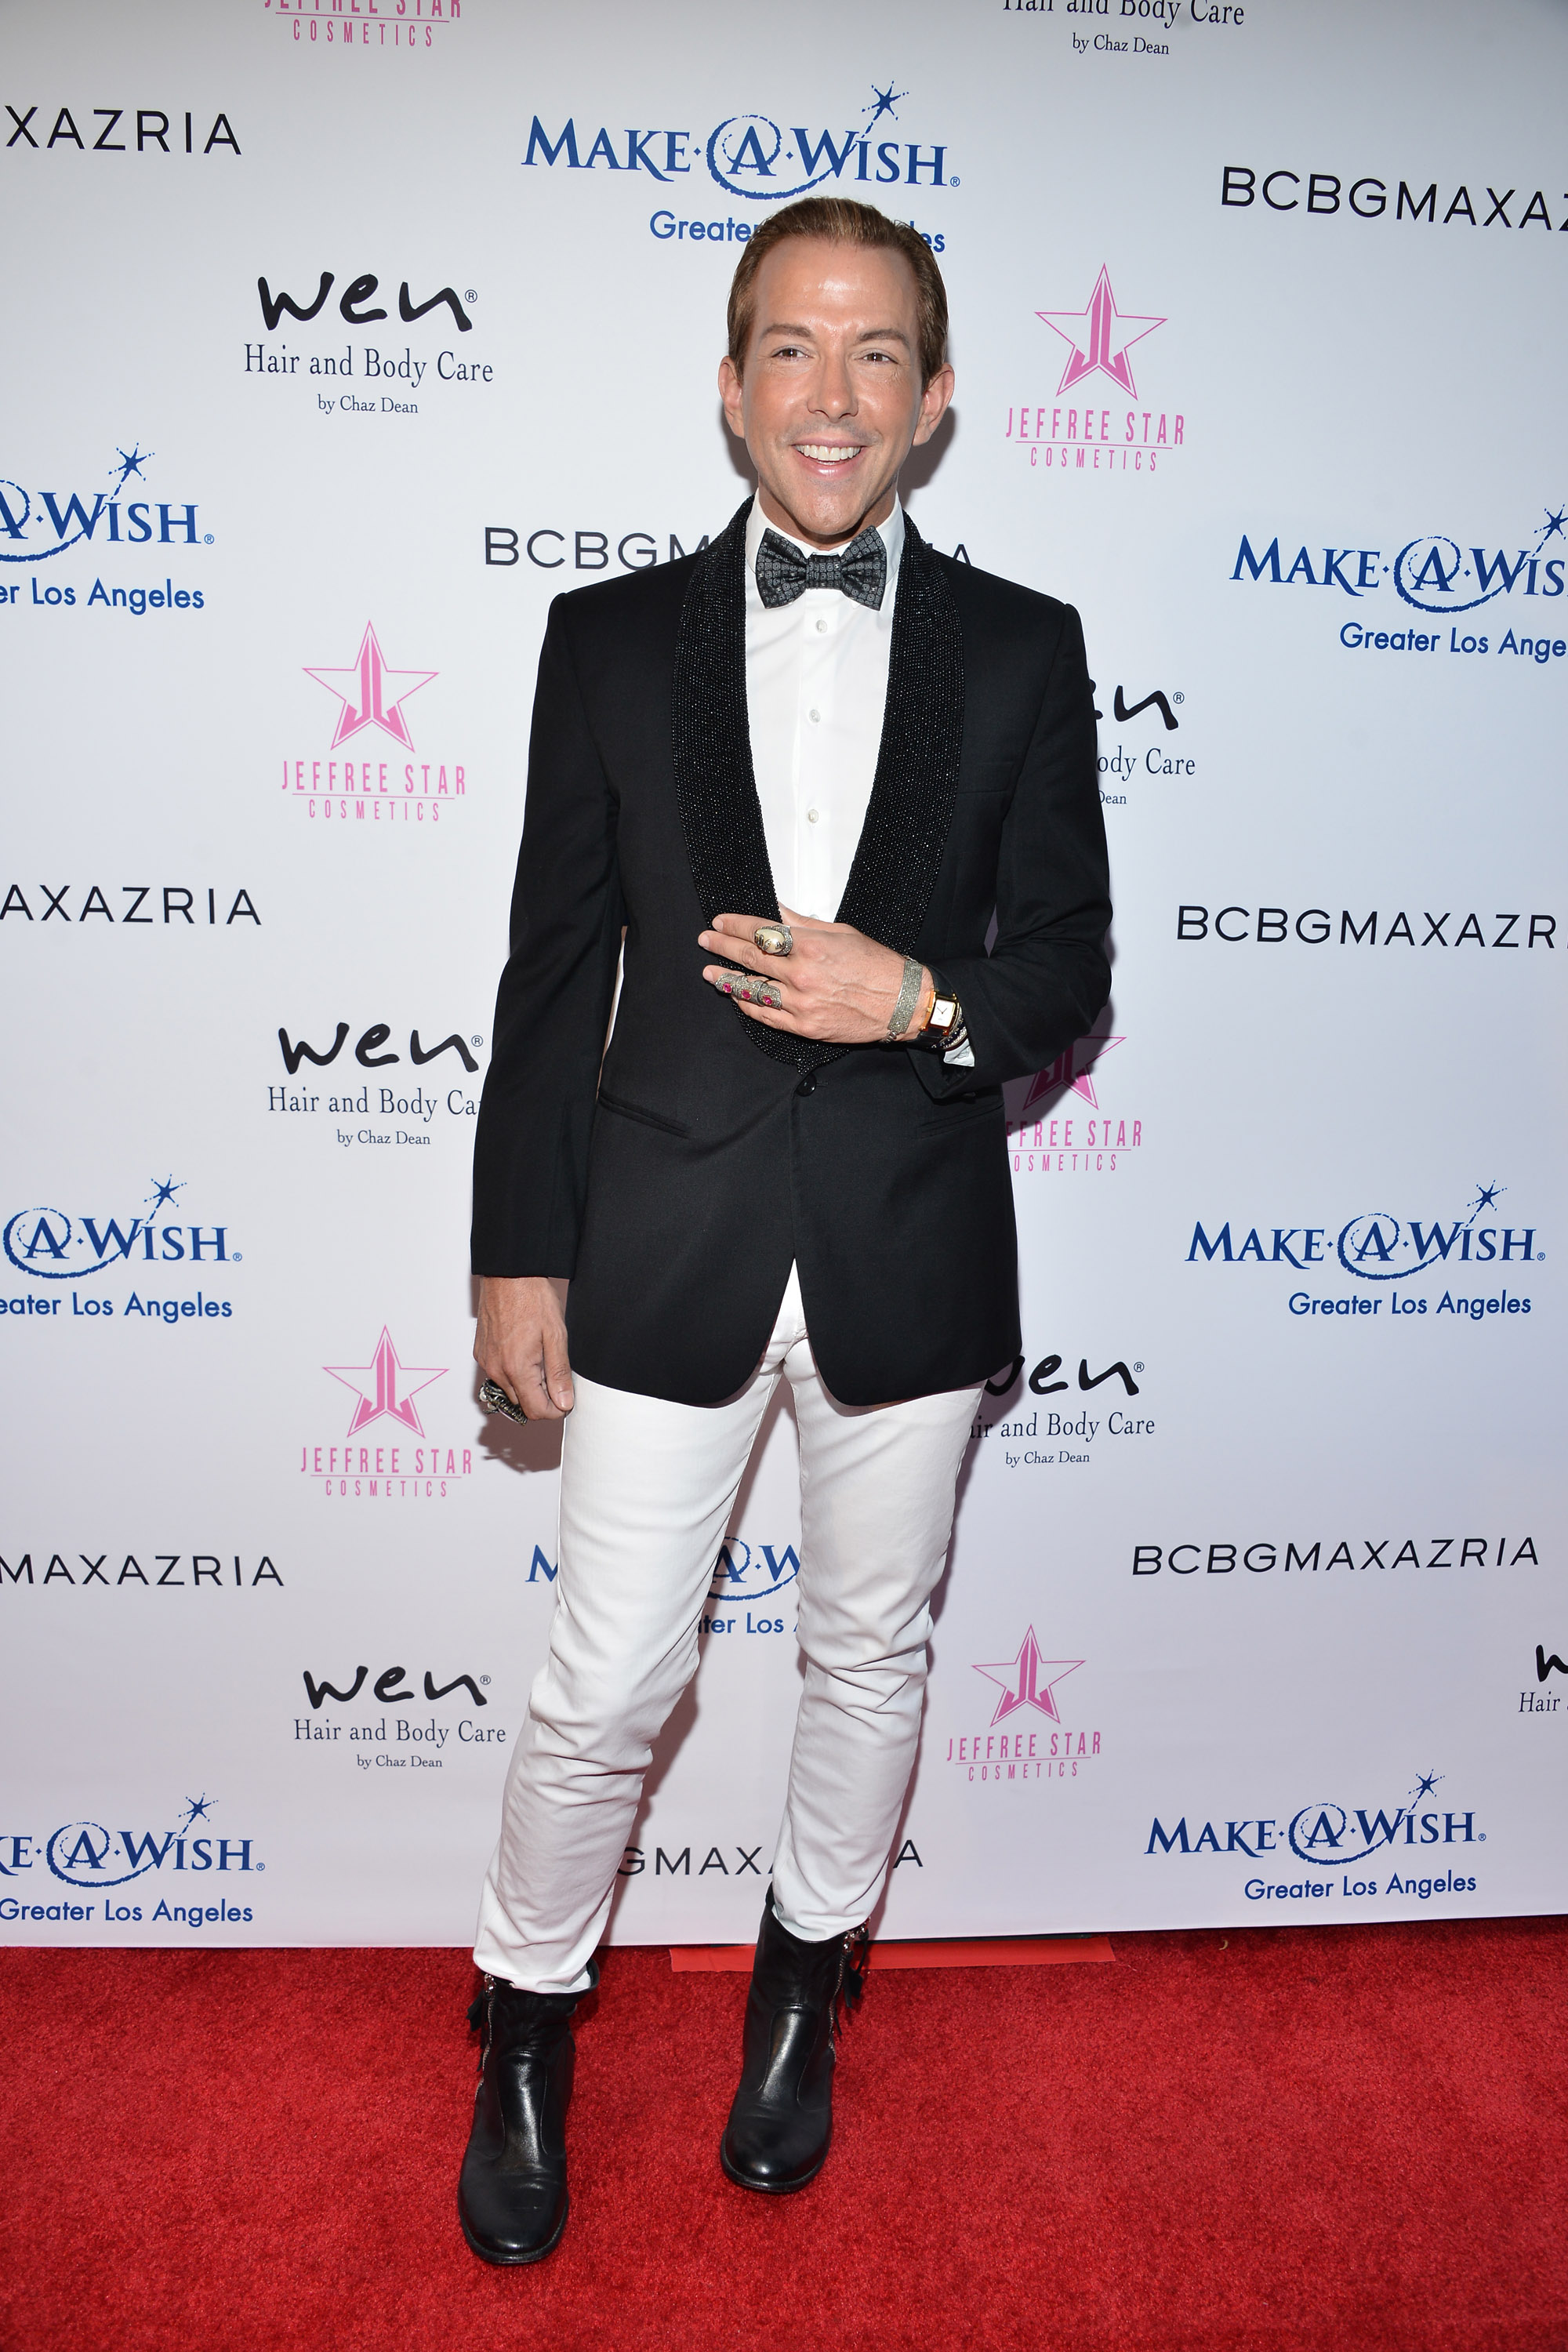 LOS ANGELES, CA - AUGUST 24: Derek Warburton attends the Inaugural Fashion Show Benefiting Make-A-Wish with BCBGMAXAZRIA and Celebrity Host Brad Goreski at The Taglyan Complex on August 24, 2016 in Los Angeles, California. (Photo by Araya Diaz/WireImage)